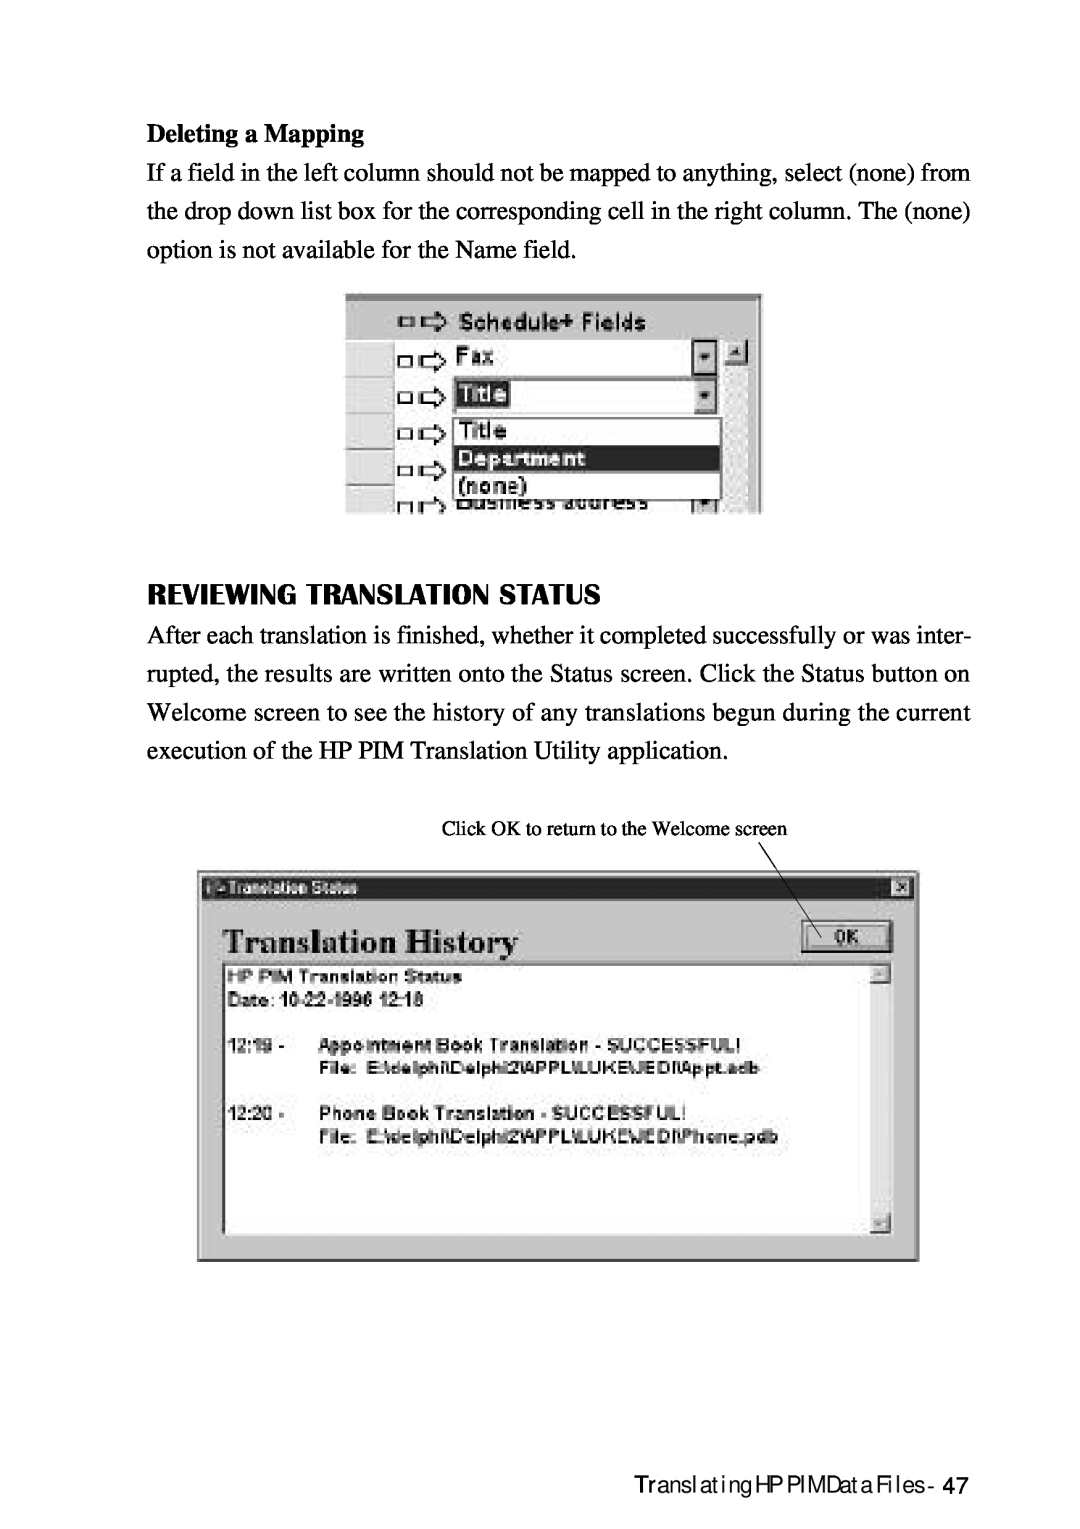 HP Palmtop 620X, Palmtop 660LX manual Reviewing Translation Status, Deleting a Mapping 